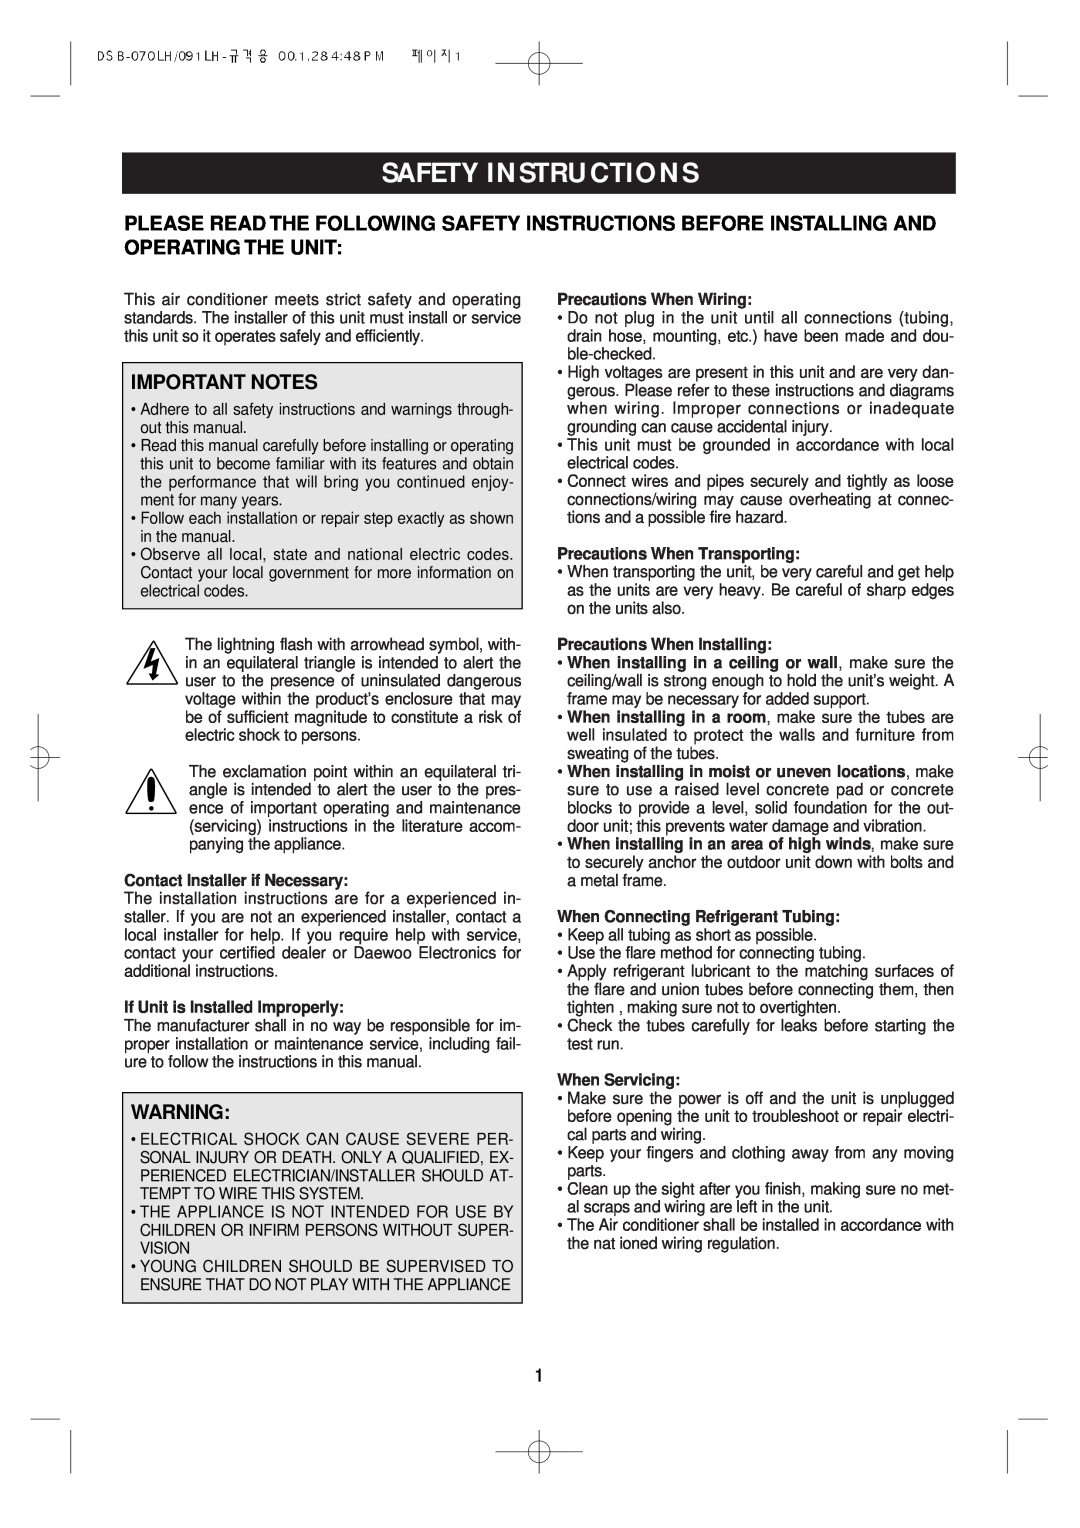 Daewoo DSB-071LH Safety Instructions, Important Notes, Contact Installer if Necessary, If Unit is Installed Improperly 